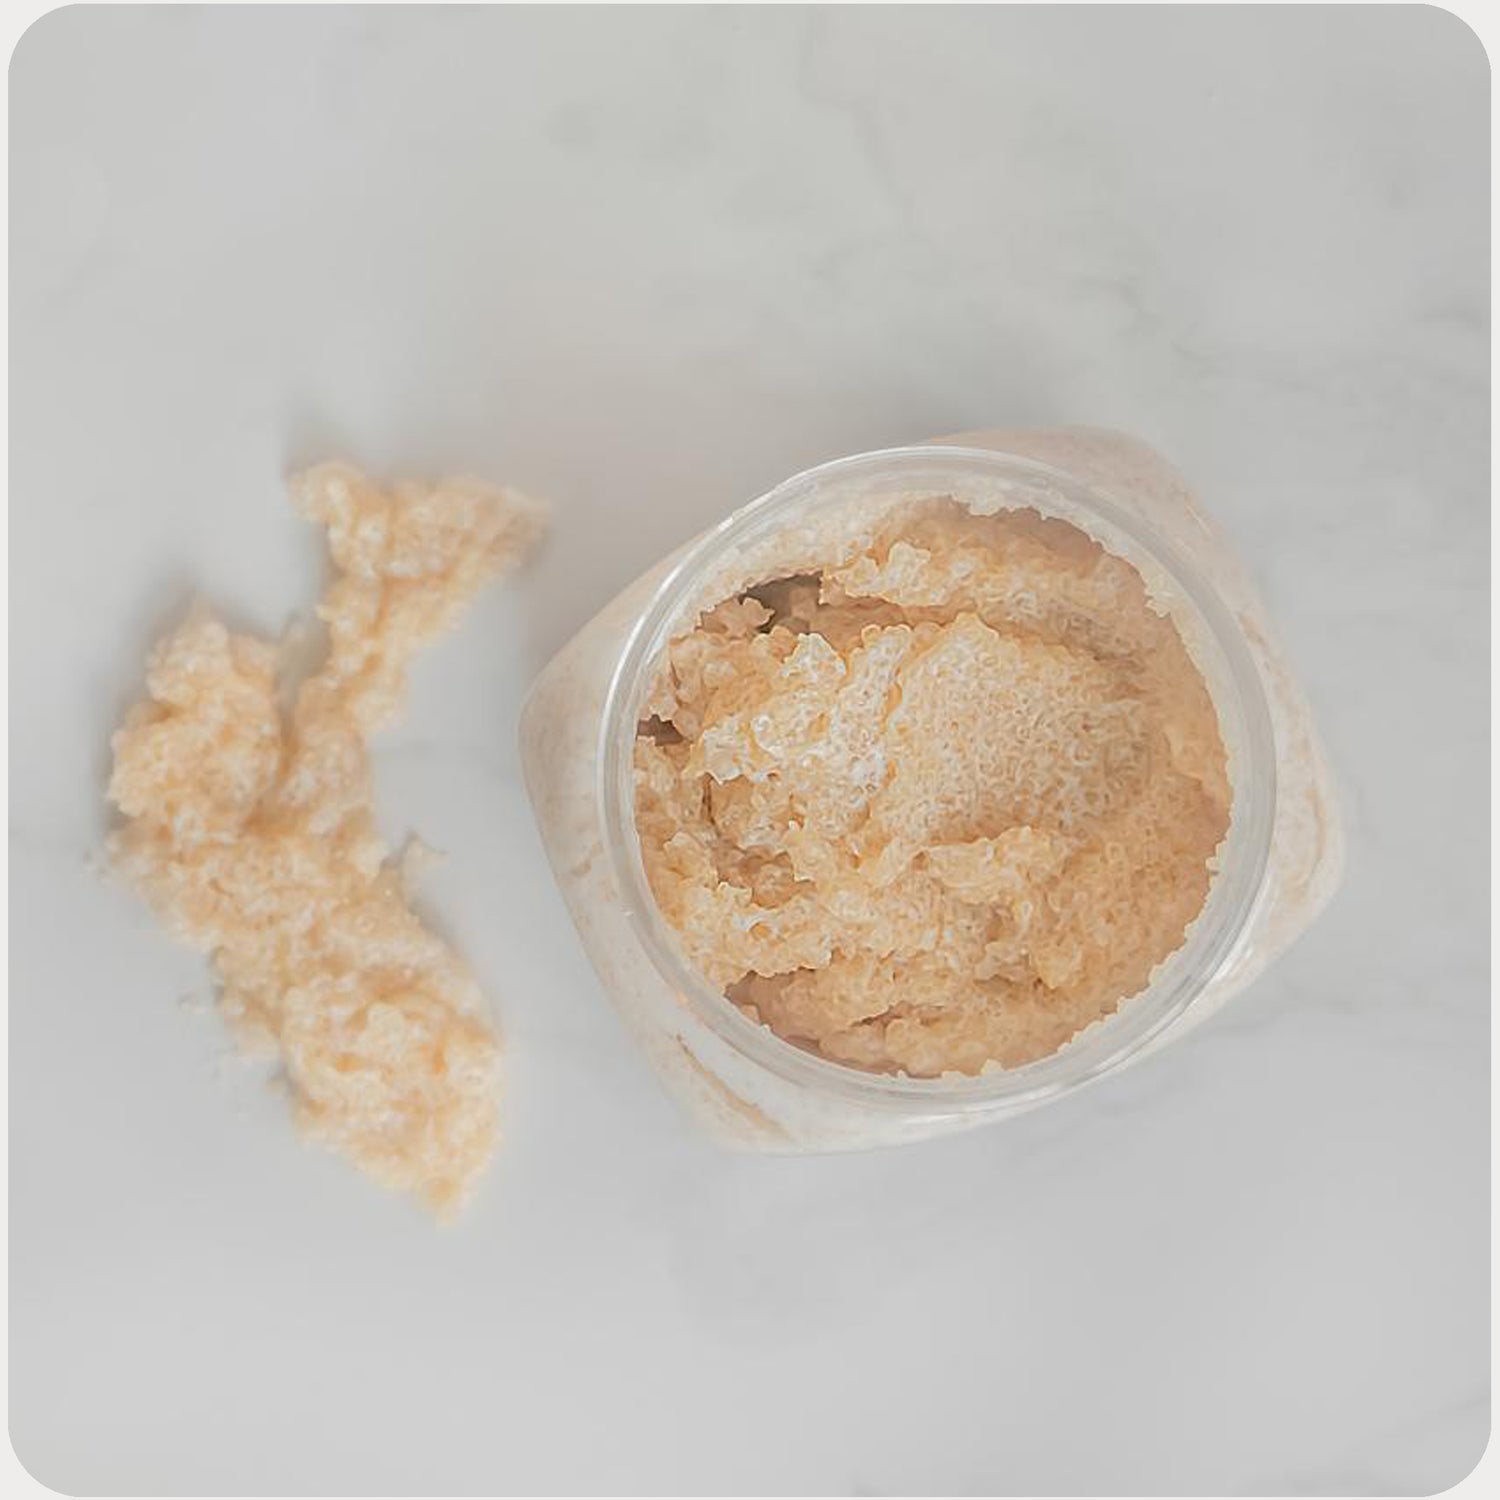 Opened jar of Babe and Body's Peachy Keen Stretch Mark Scrub